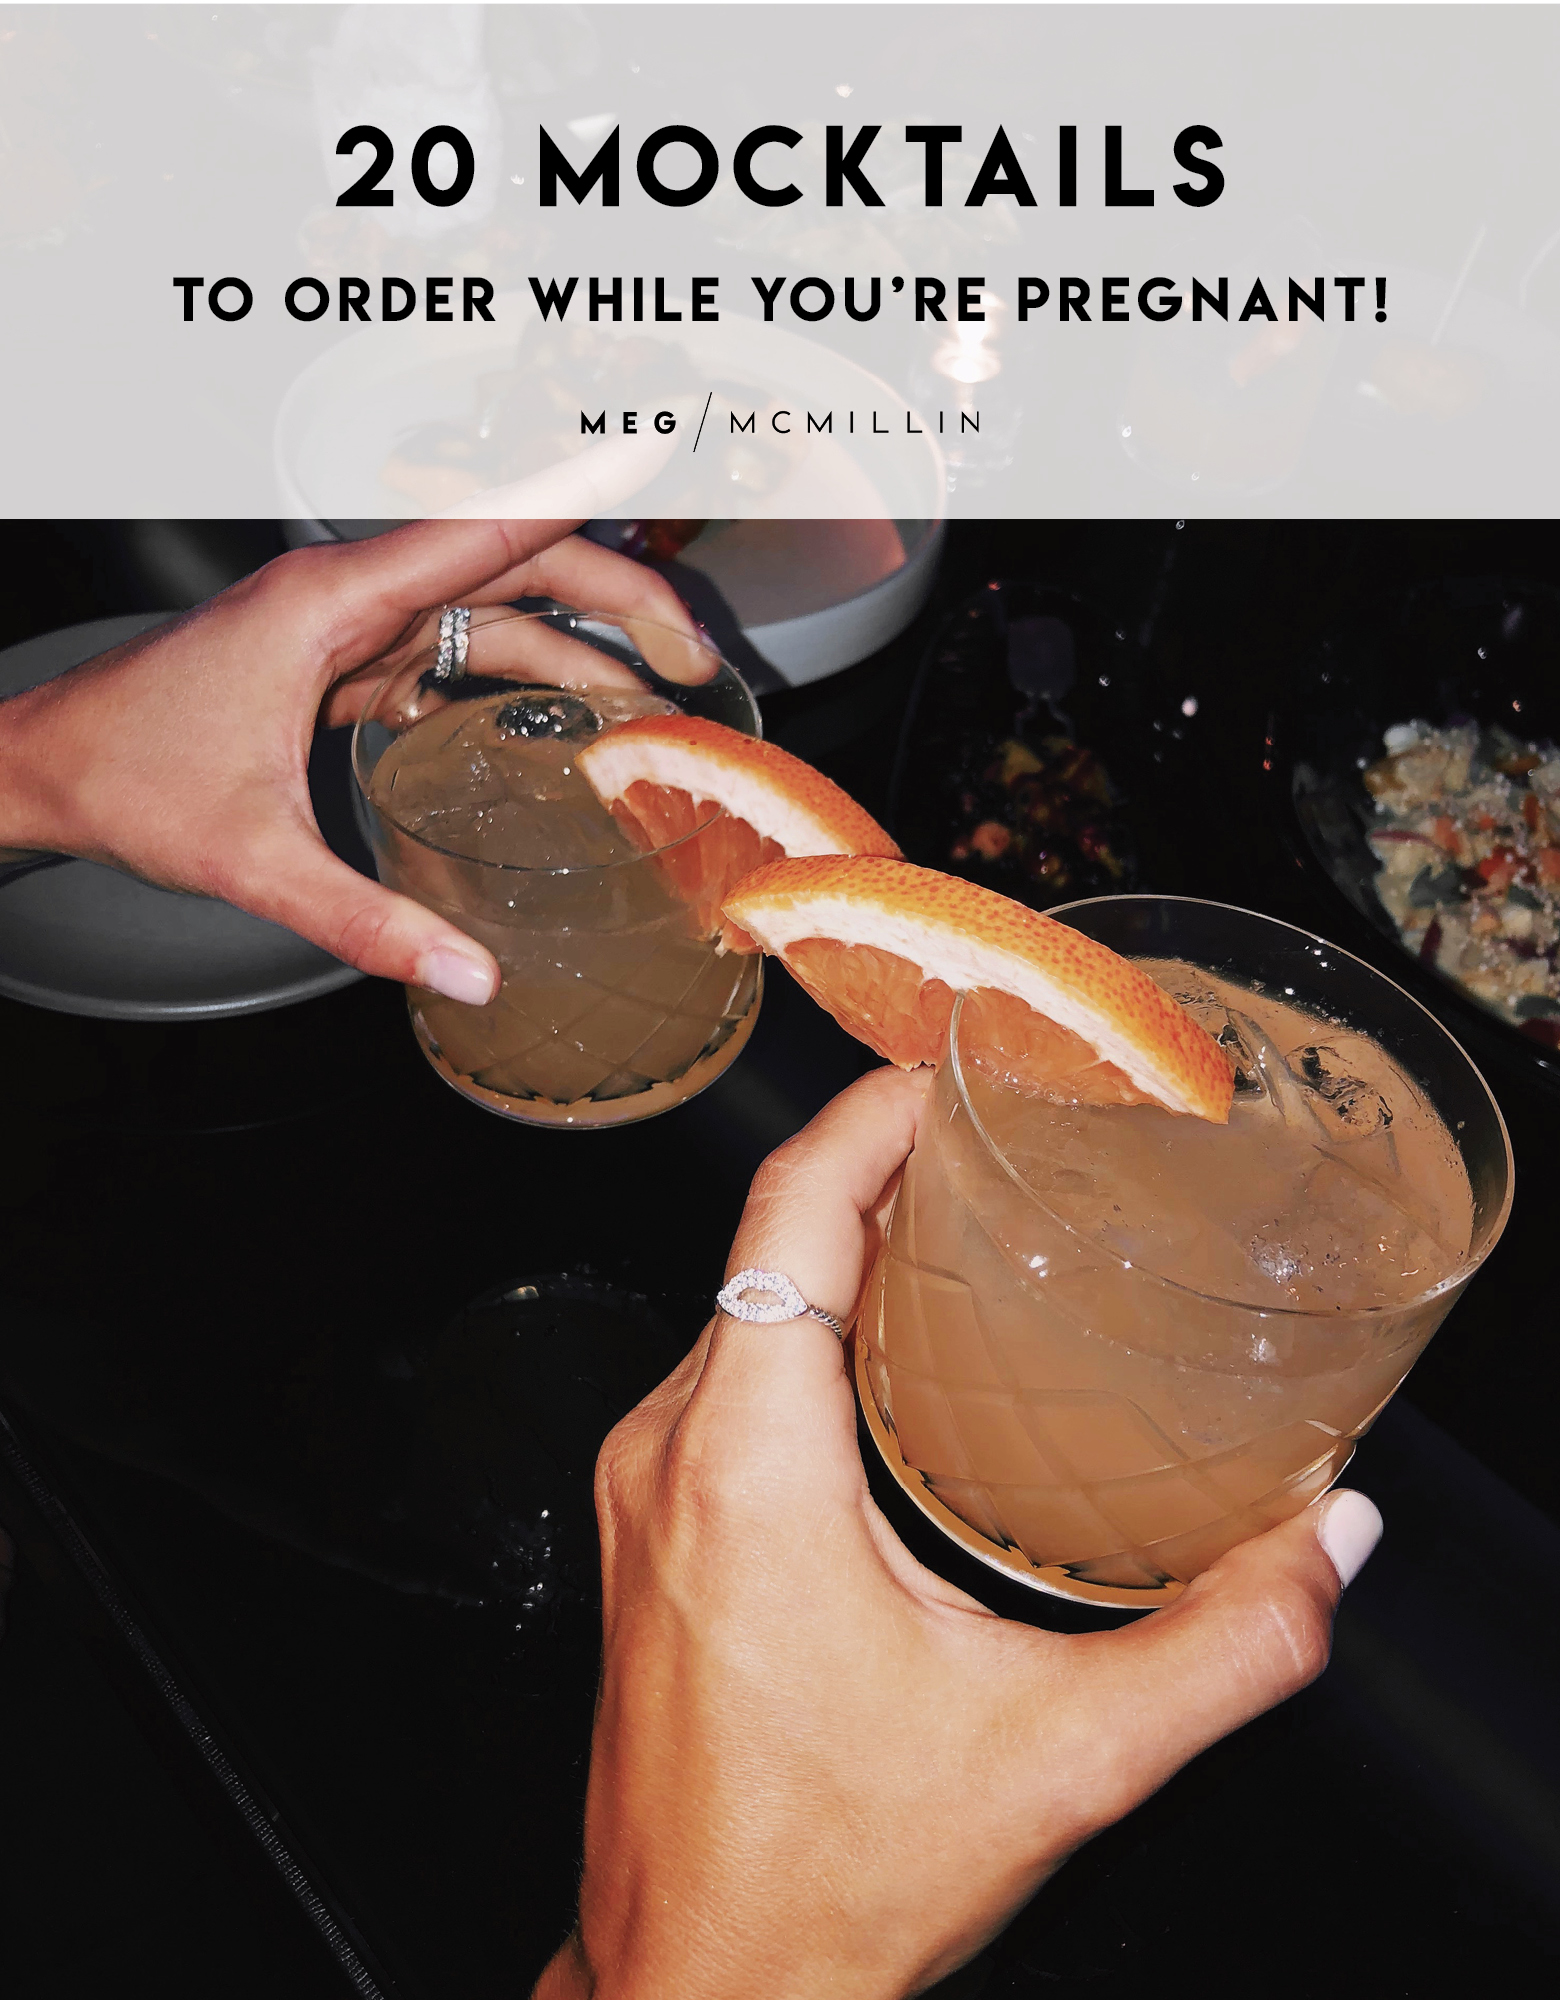 20 mocktails to order while you're pregnant! – Meg McMillin